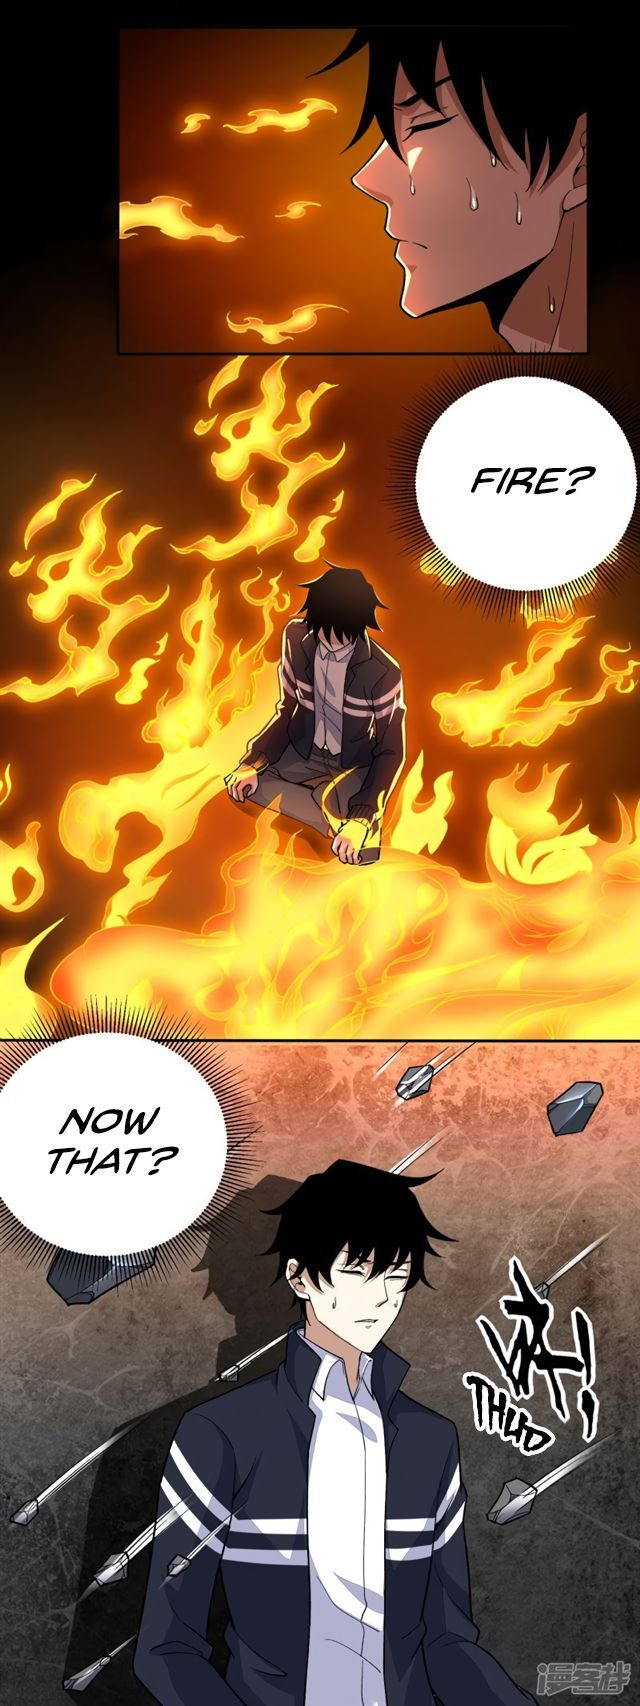 King of Apocalypse Chapter 70 page 8